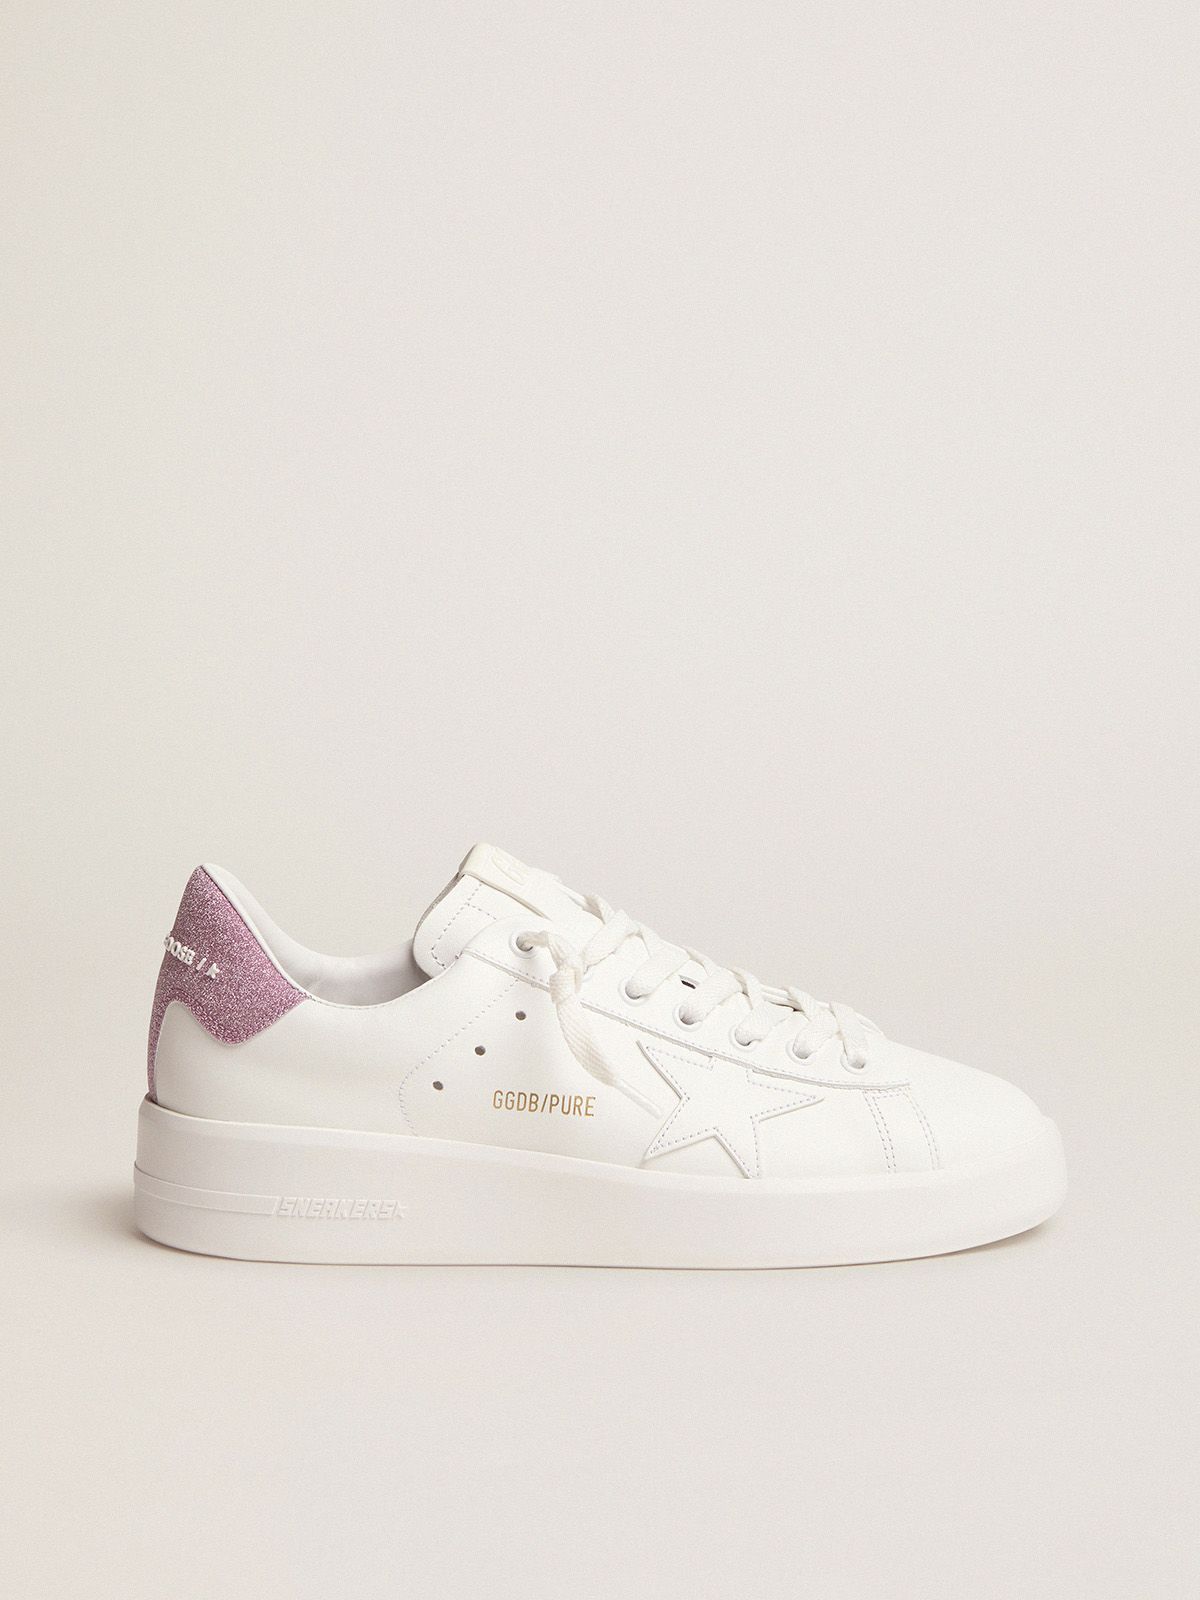 golden goose leather in tab heel Purestar sneakers glitter pink with white